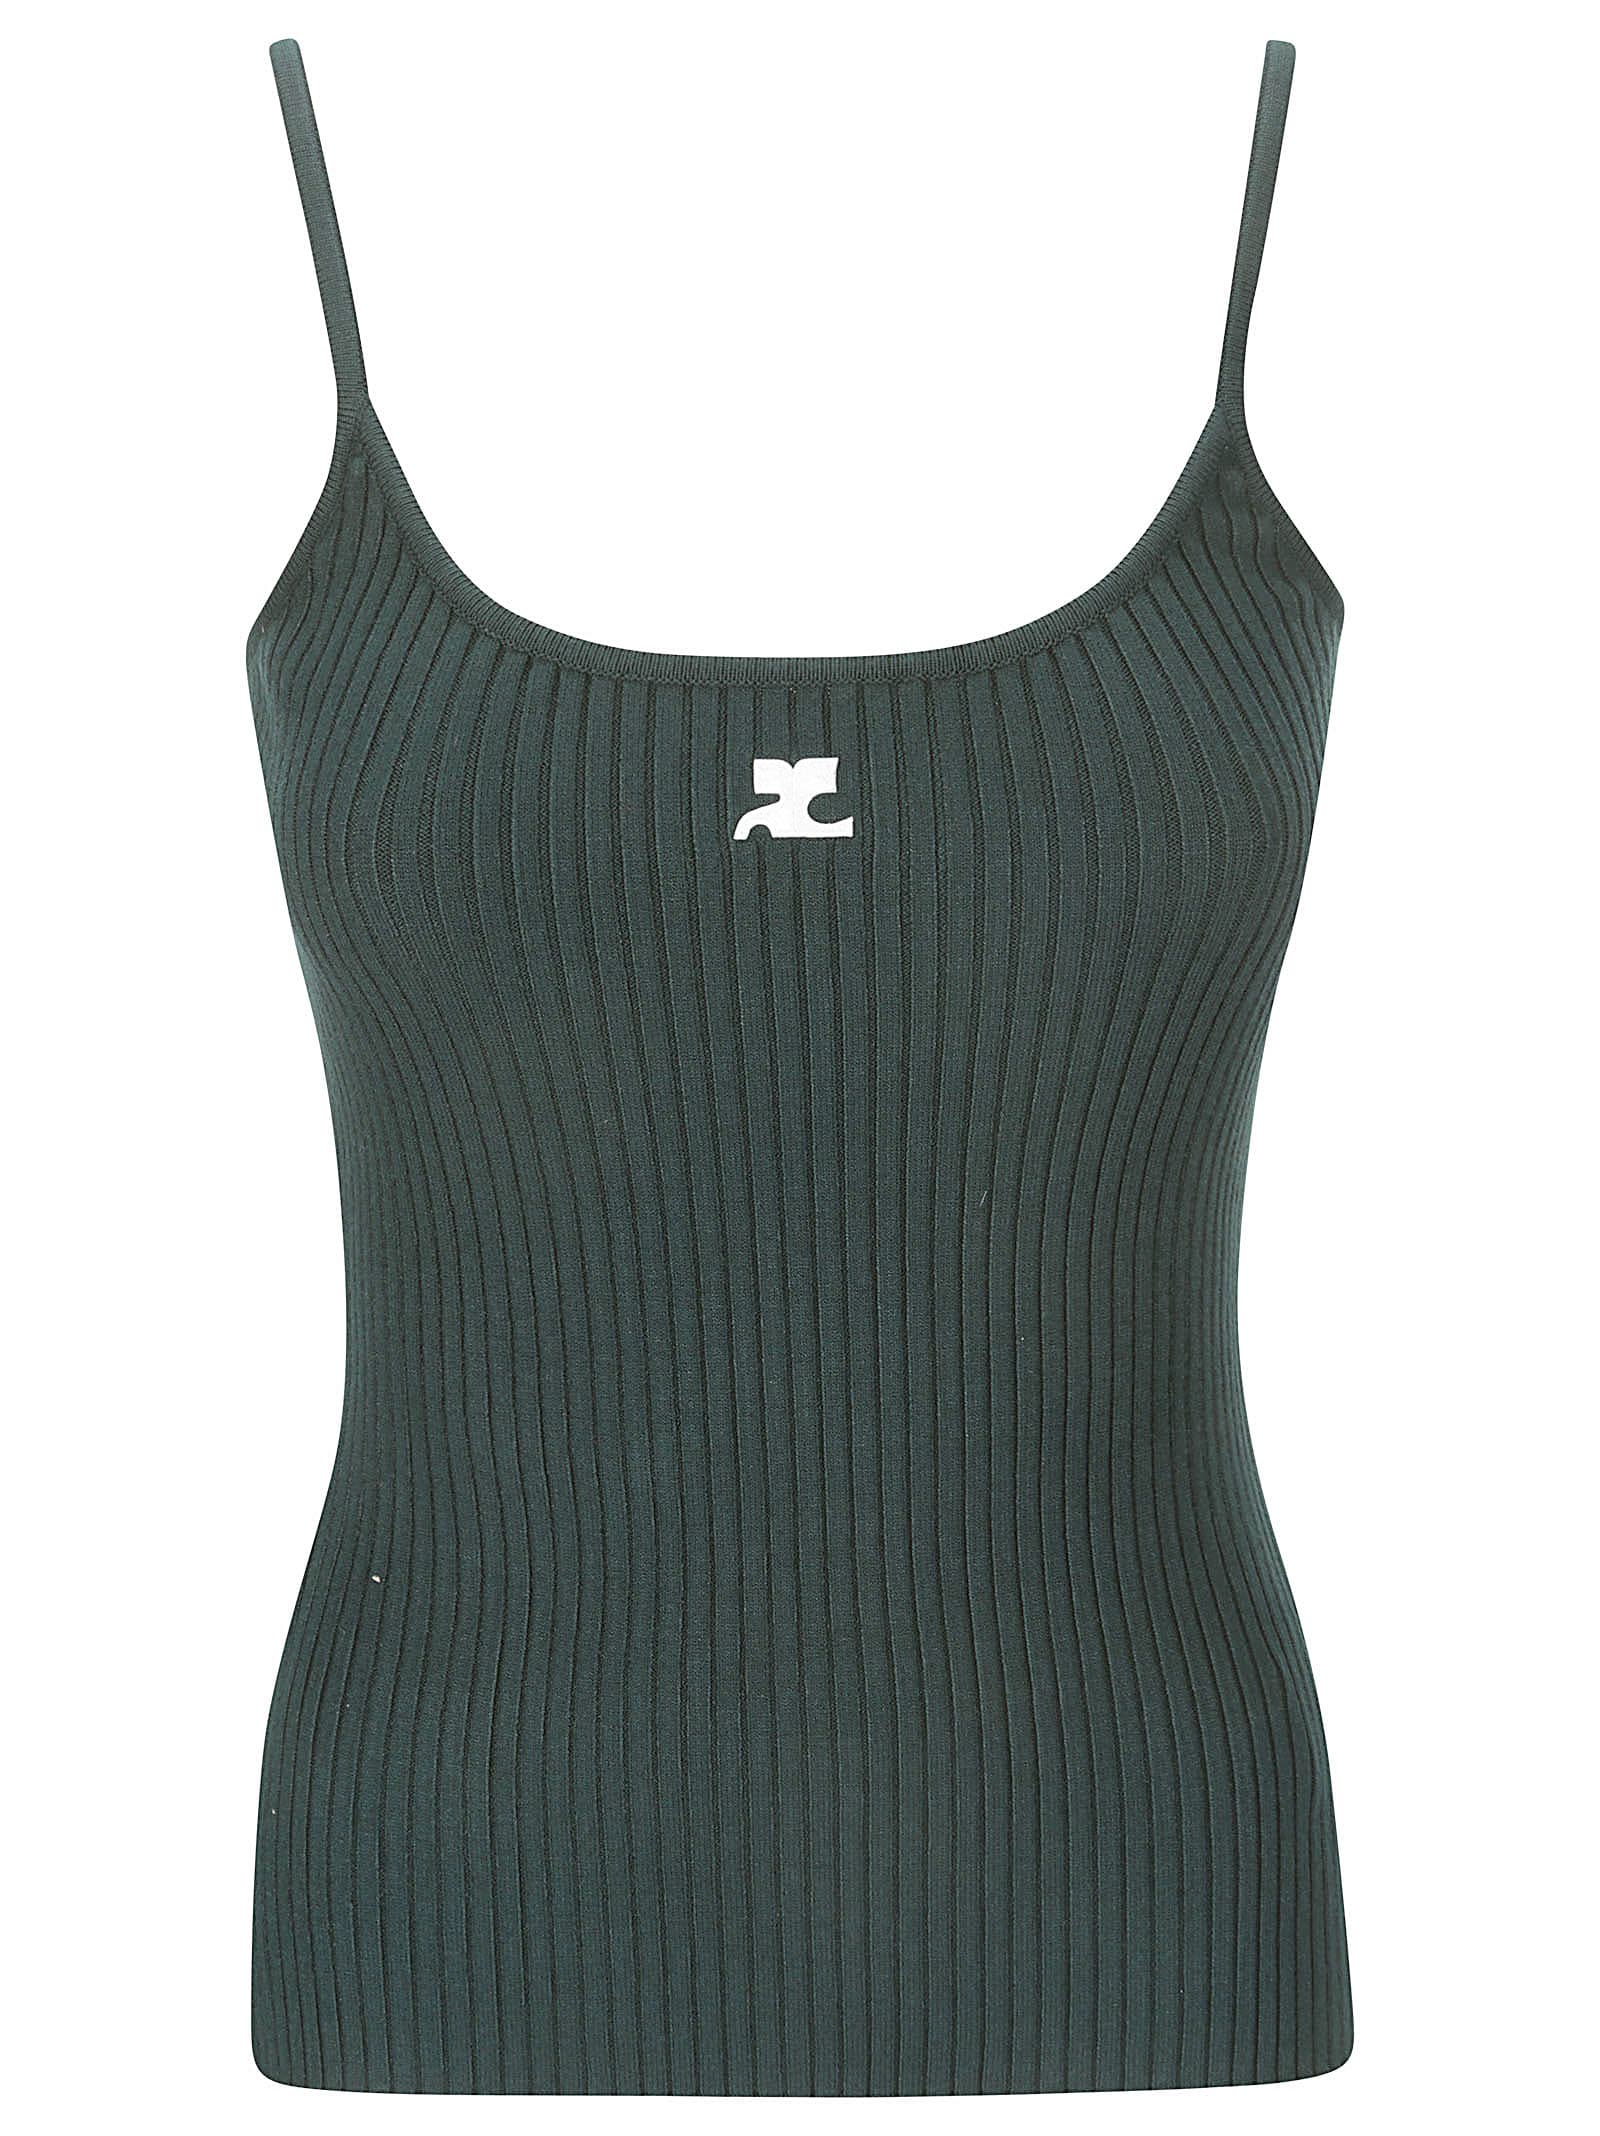 COURRÈGES REEDITION KNIT TANK TOP